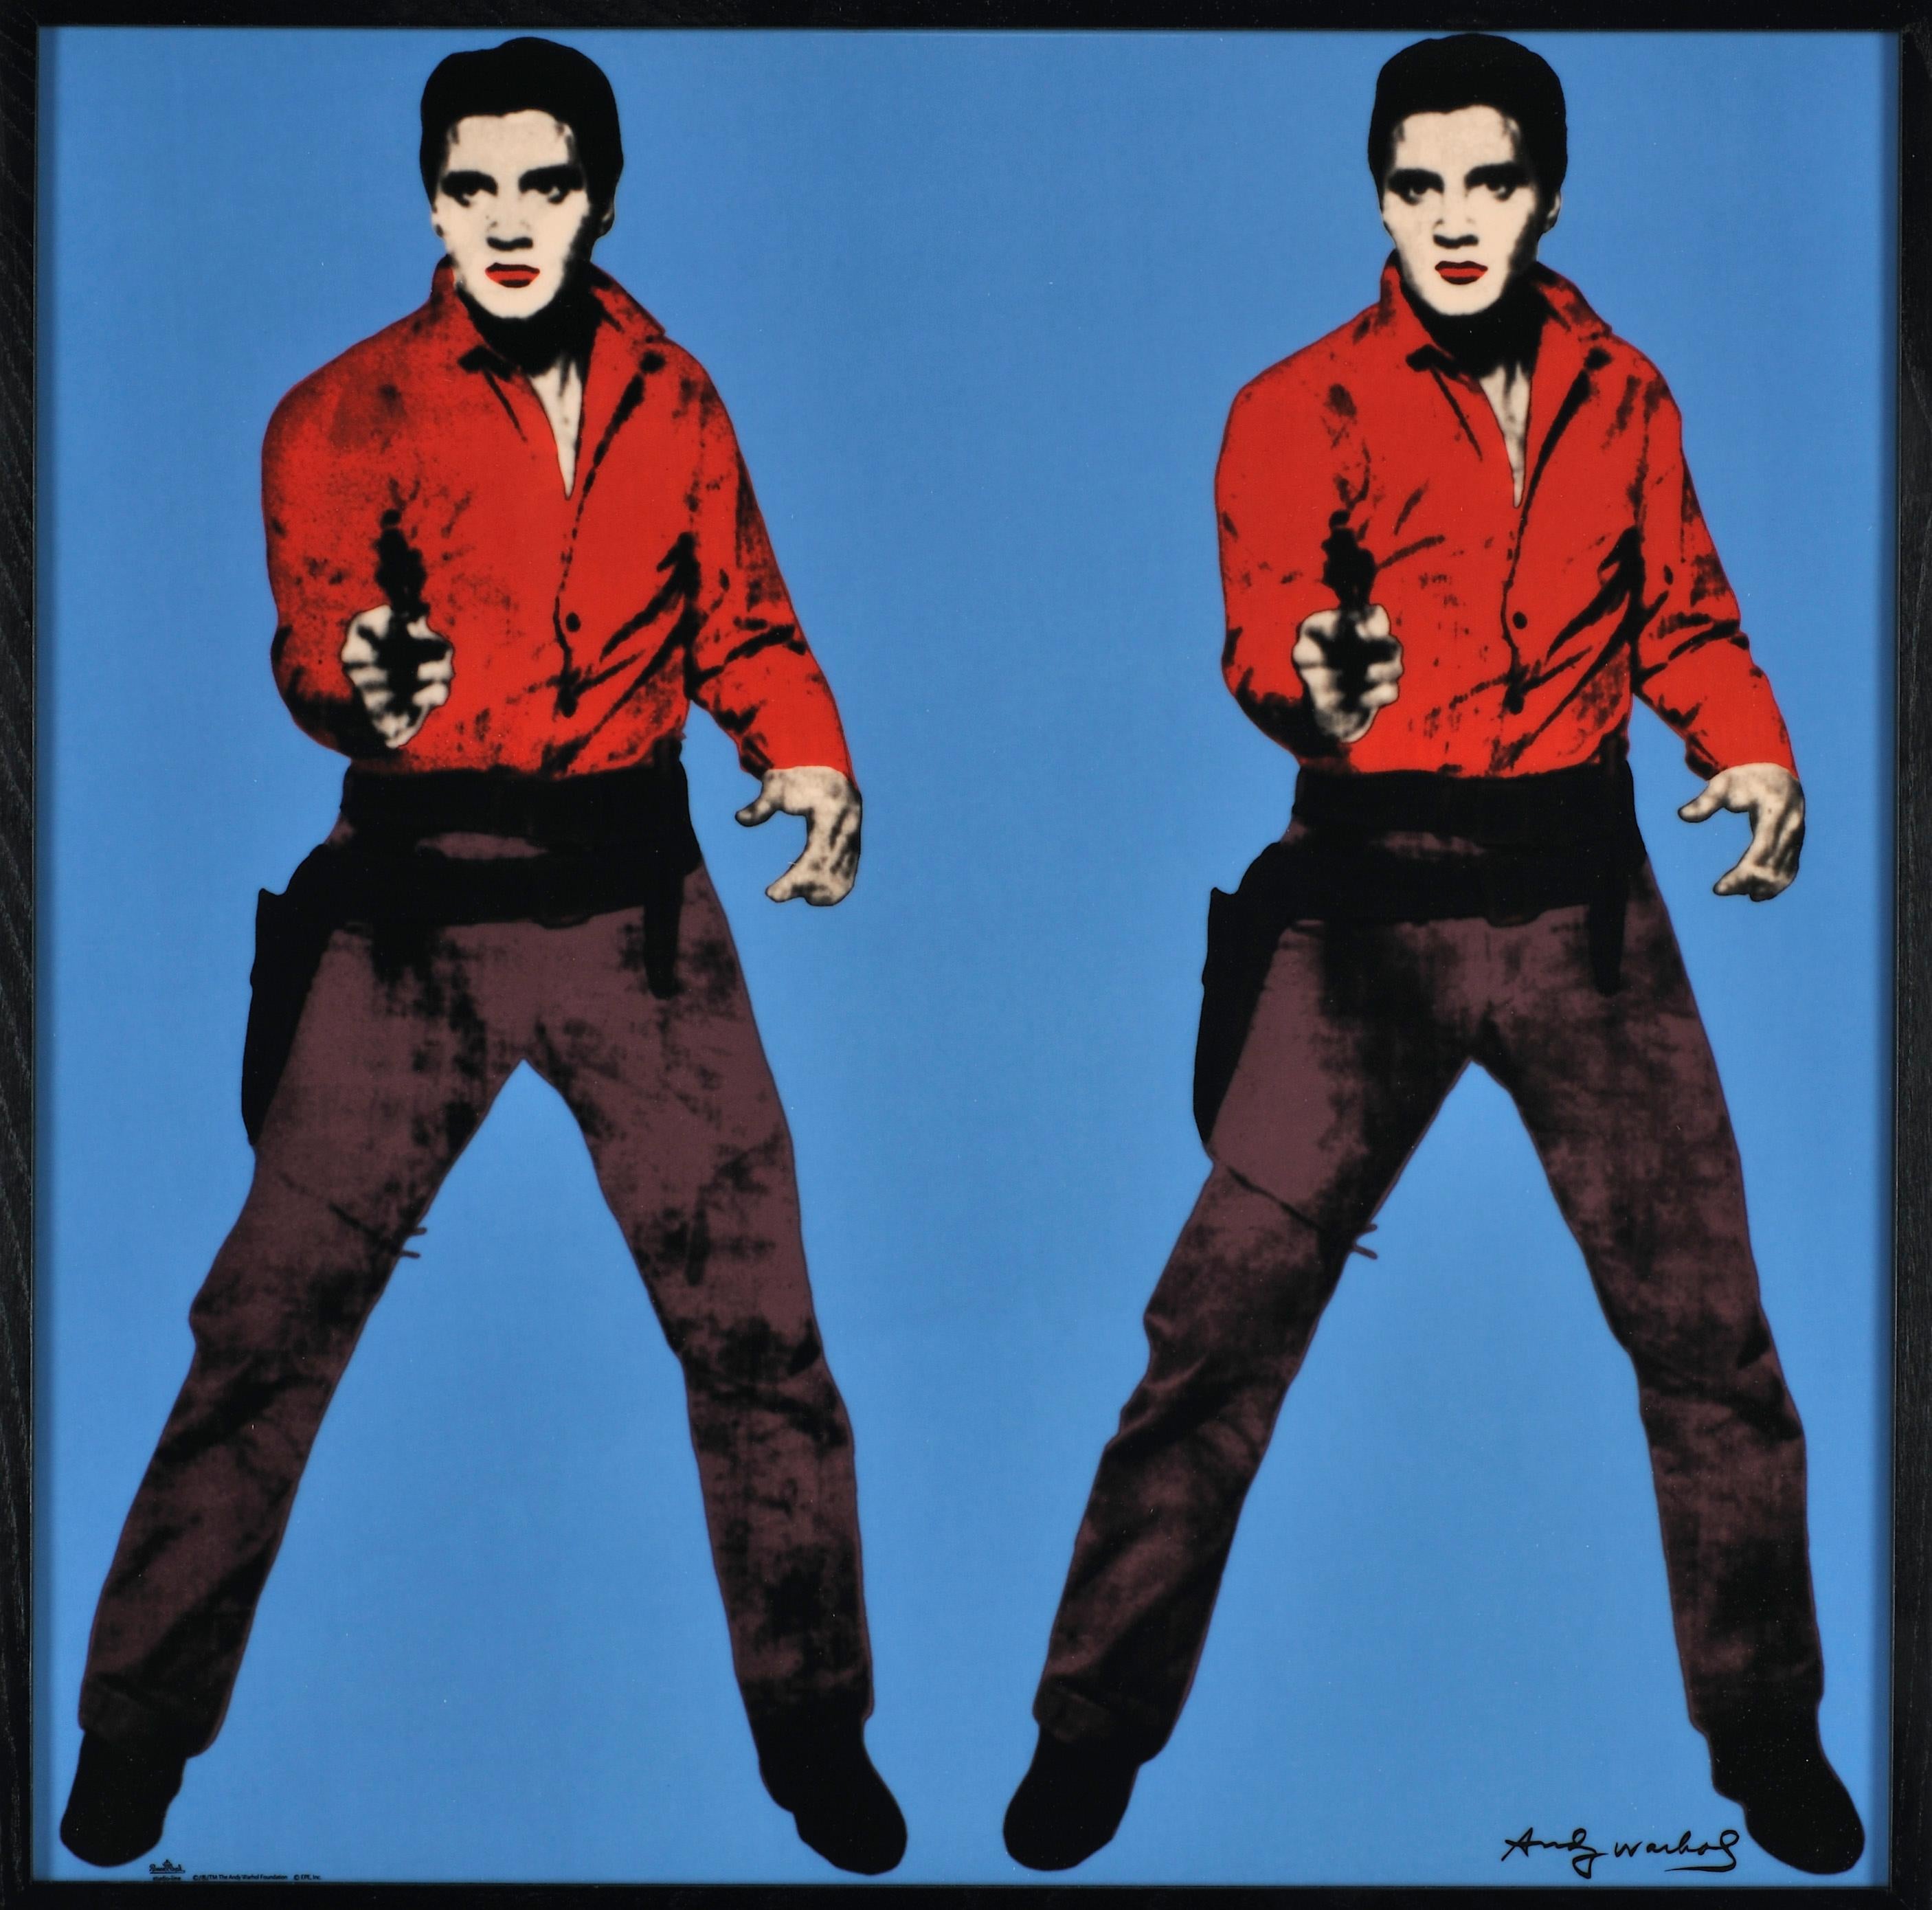 ANDY WARHOL (after)
Blue Elvis
Edition of 49
From Rosenthal Studio Line
51 x 51 cm (20.1 x 20.1 in.)
Signed in glaze (fac-simile signature), numbered on the reverse on label In wooden box, accompanied by Certificate of Authenticity from the